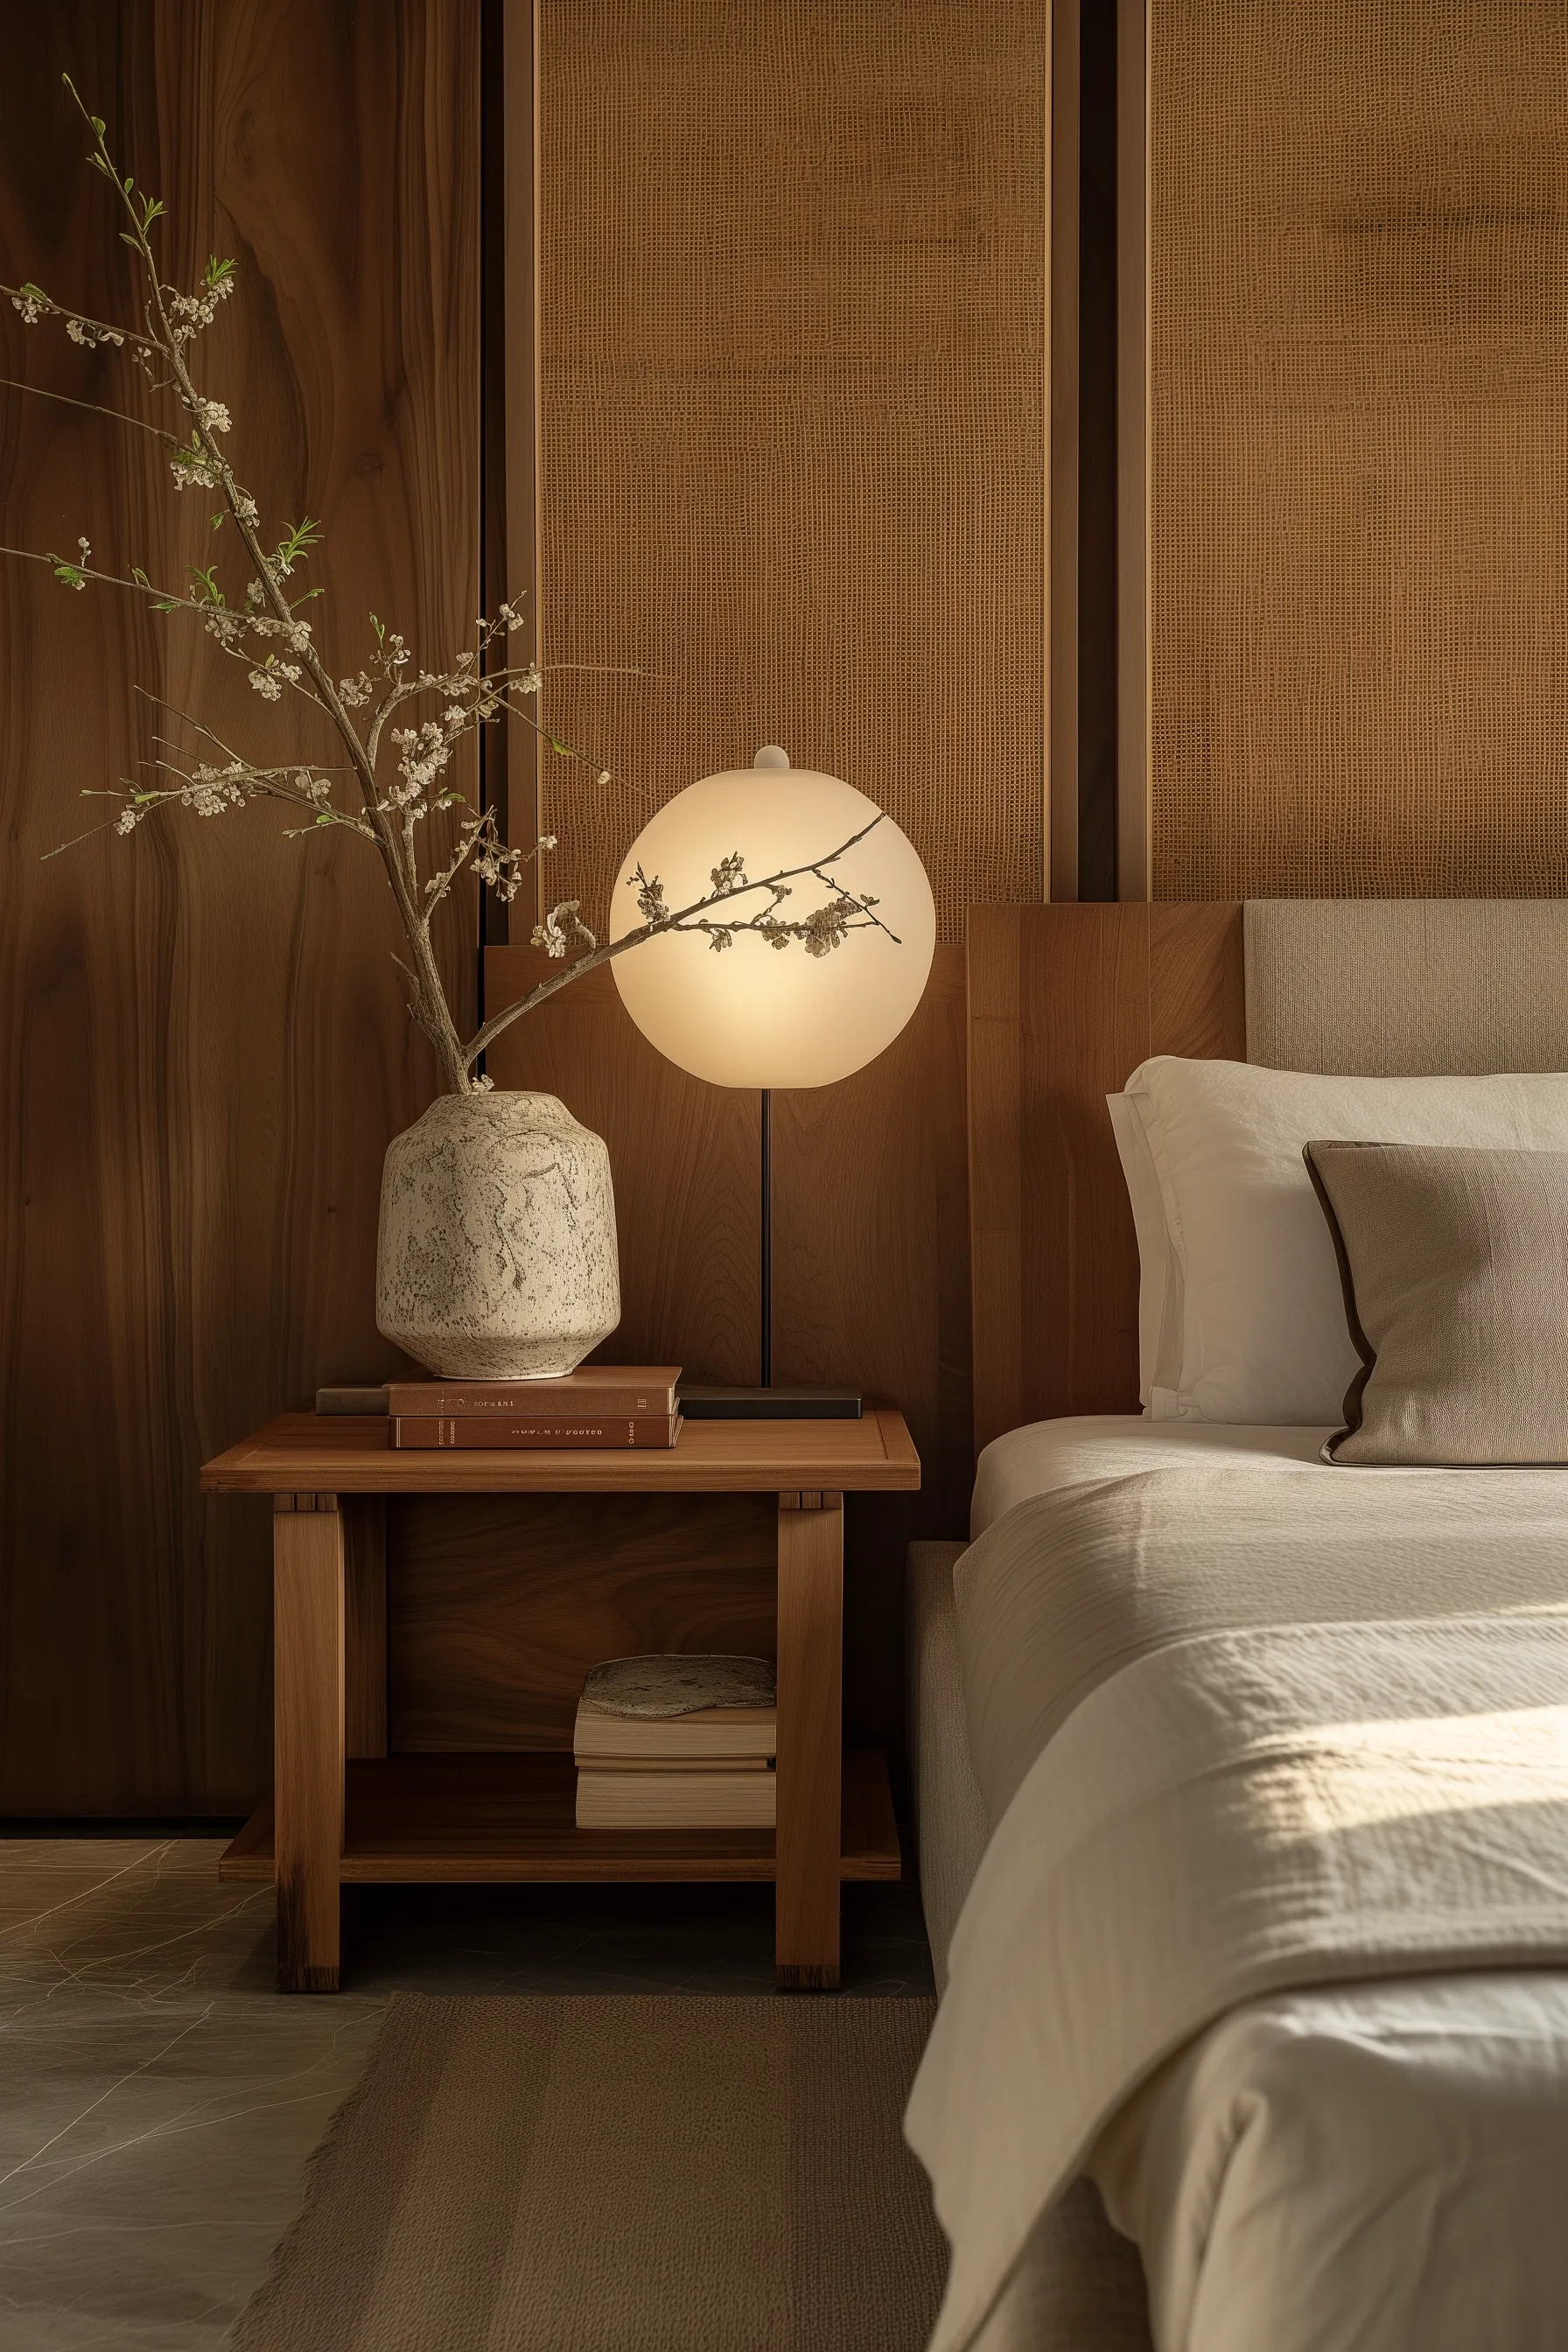 A marble vase and circle light in a bedroom